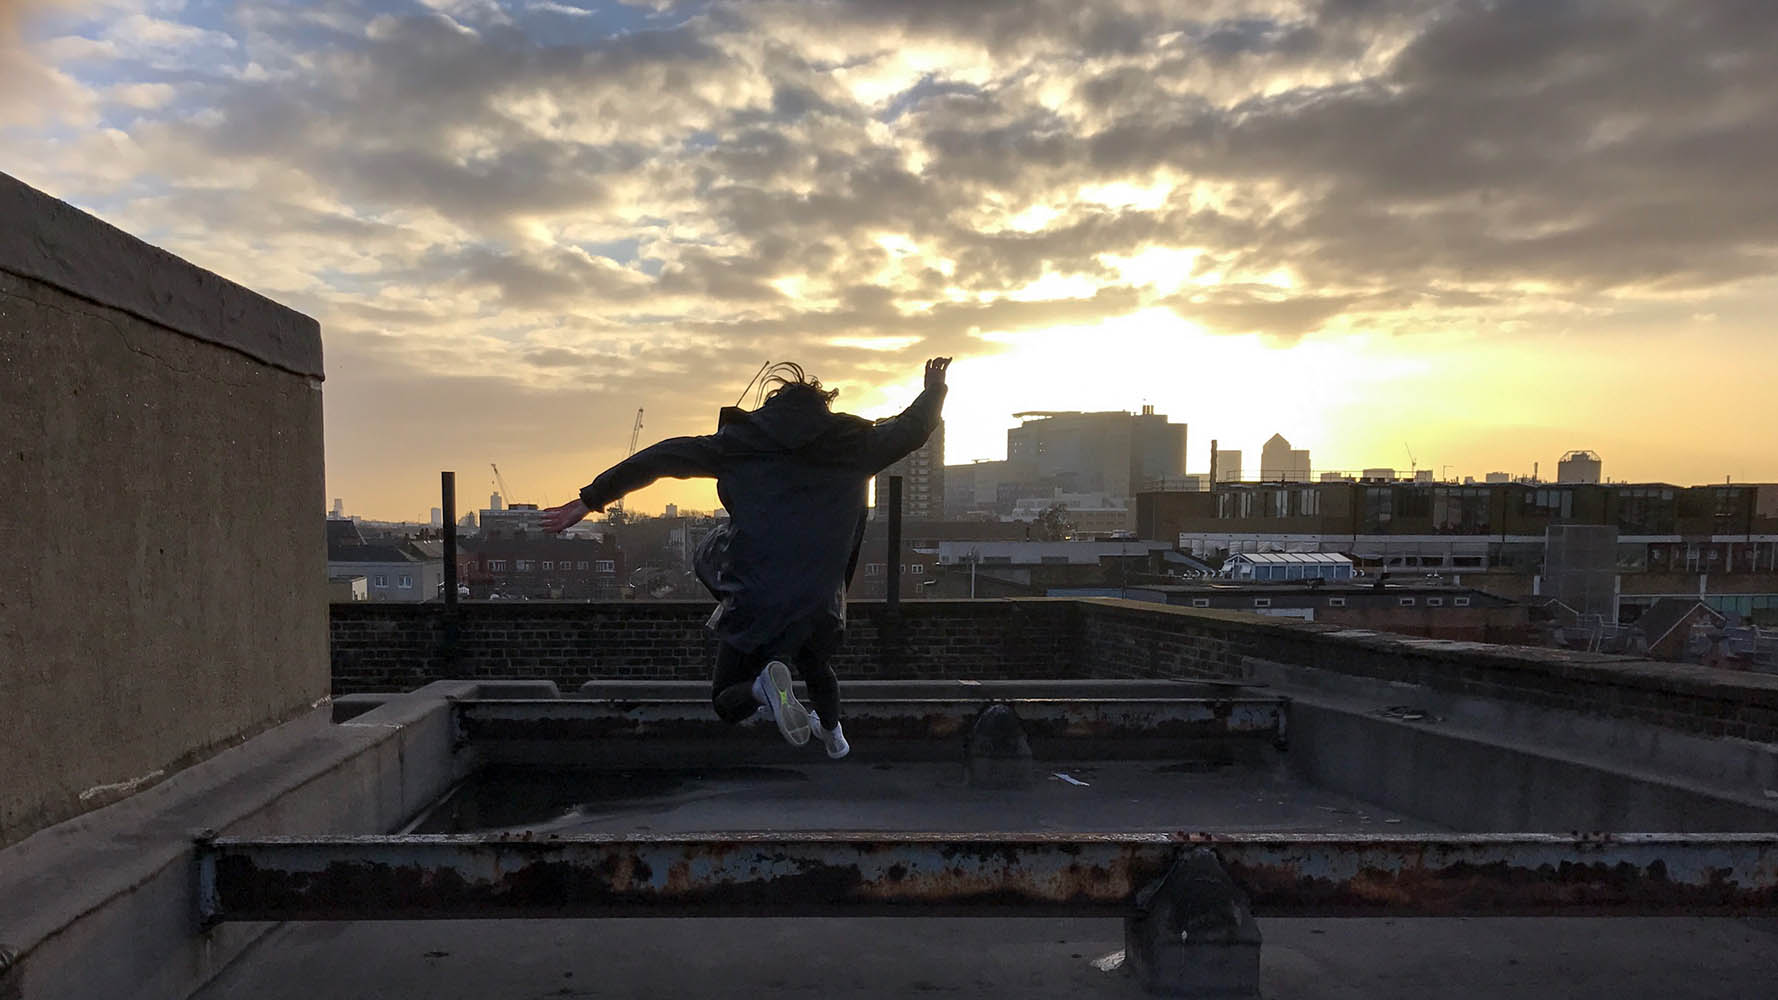 F Block Roof, Filming and Photography locations, Skyline, Roof top, East London